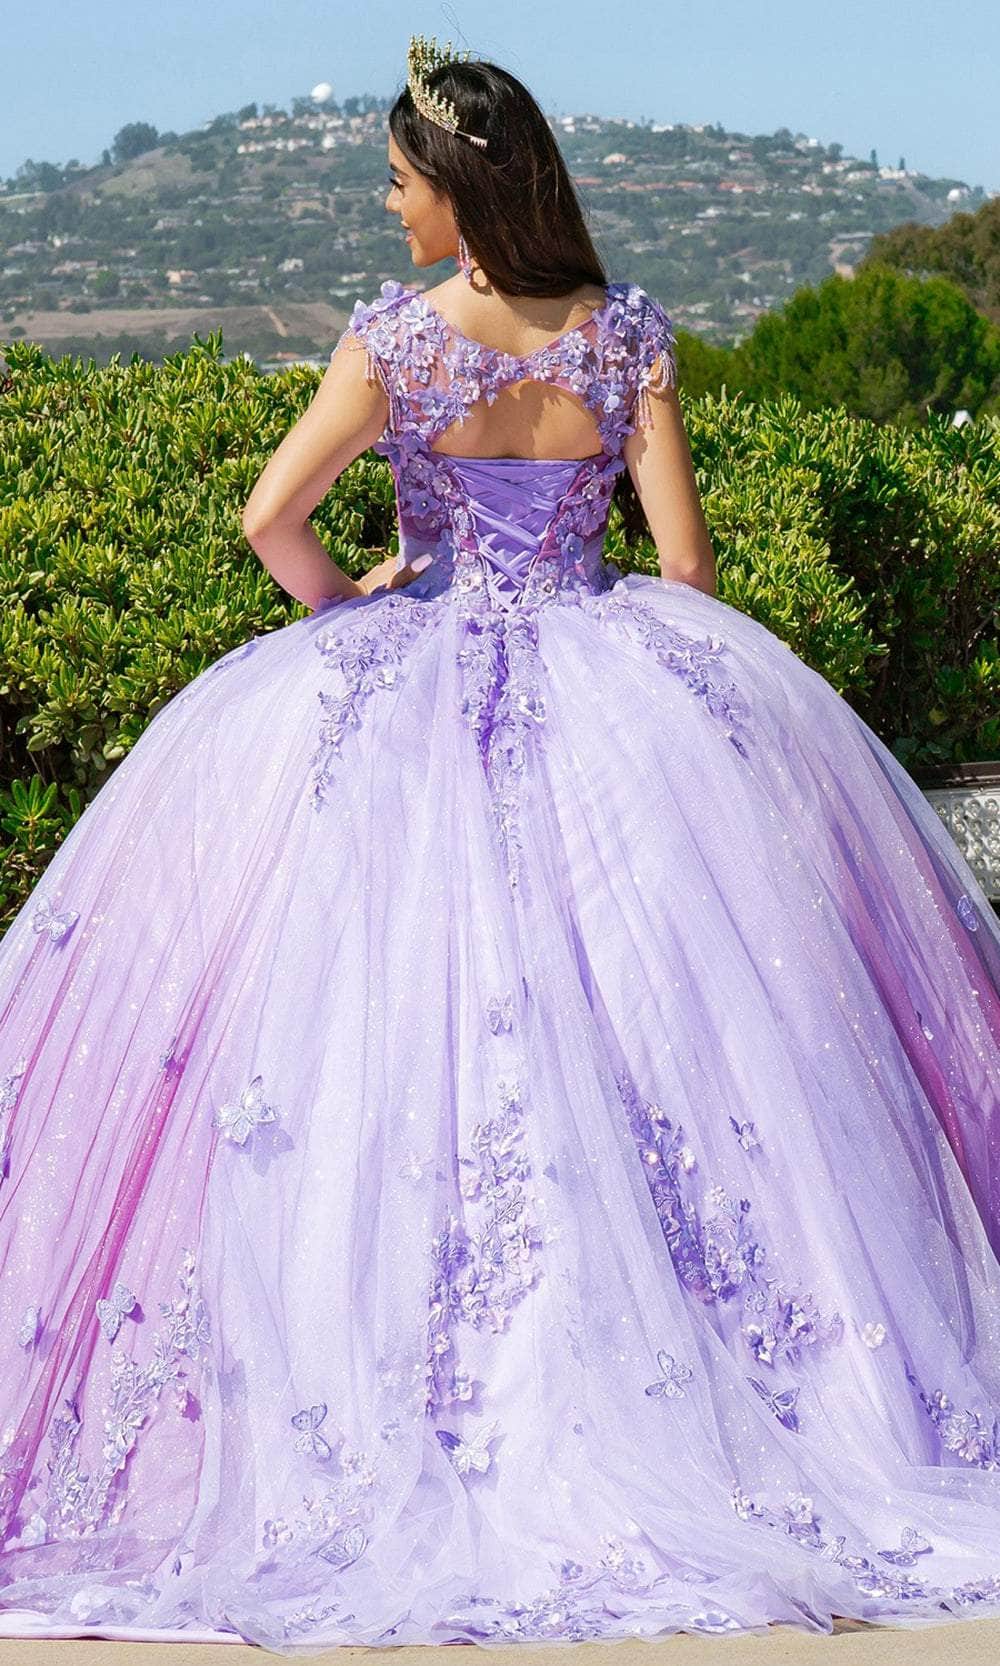 Cinderella Couture 8088J - Cap Sleeve 3D Floral Embellished Ballgown Ball Gowns